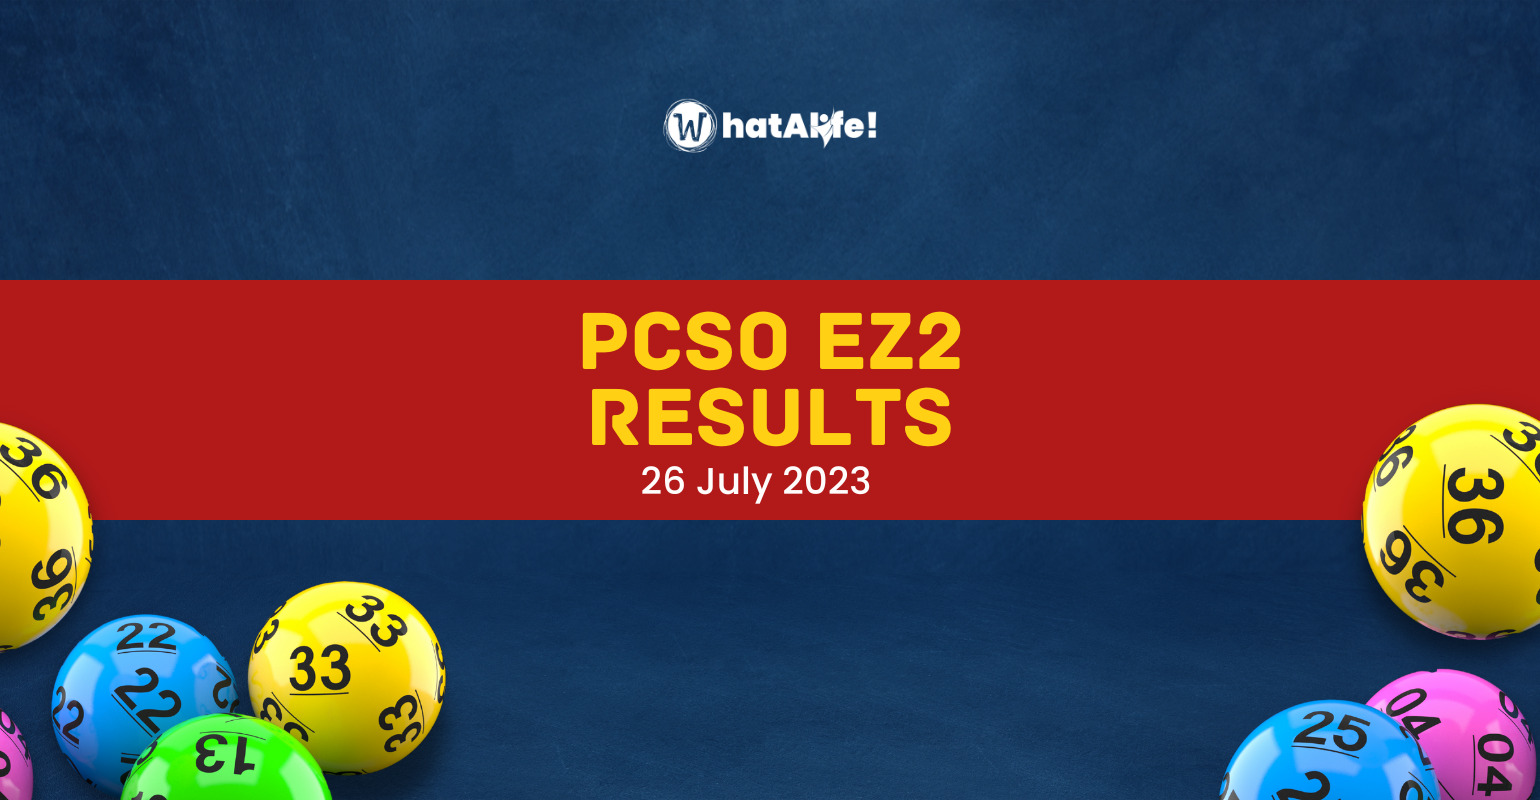 EZ2 2D RESULTS July 26, 2023 (Wednesday)